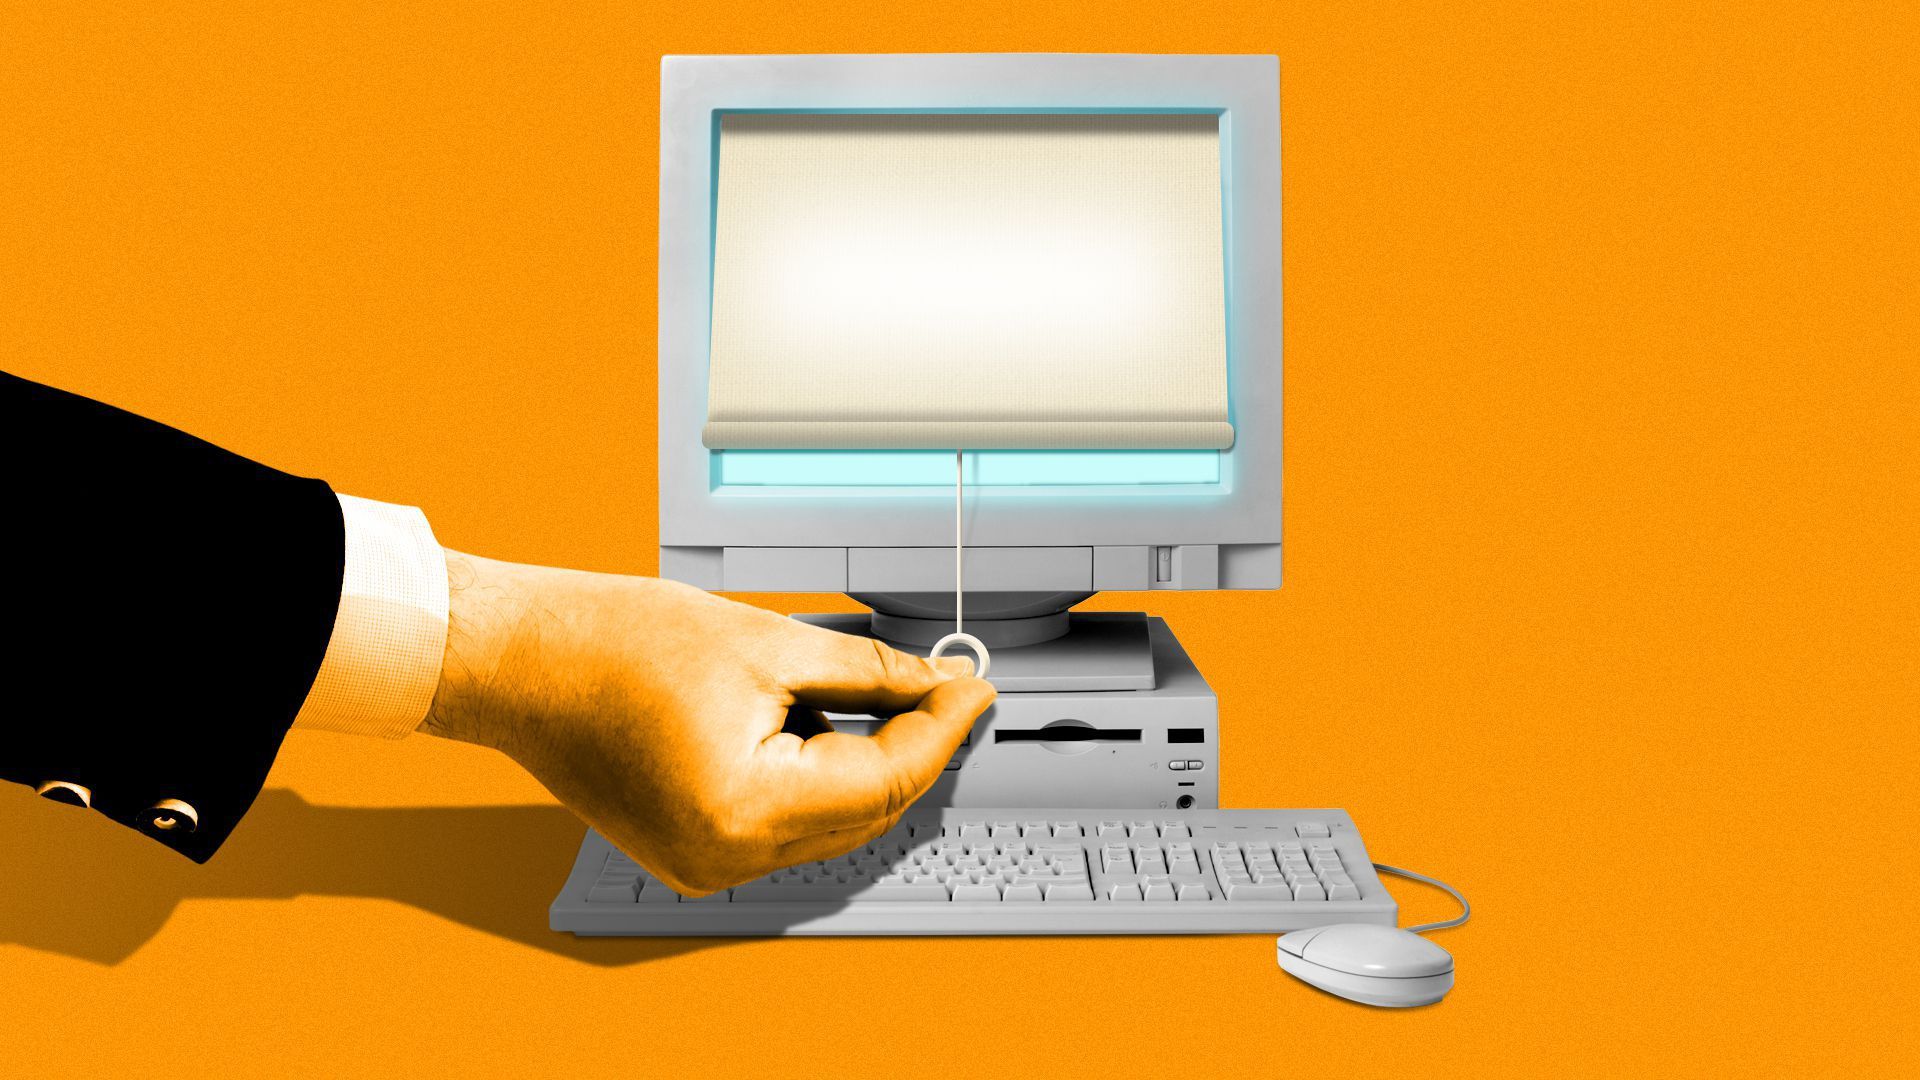 Illustration of a hand pulling a shade down over a computer monitor